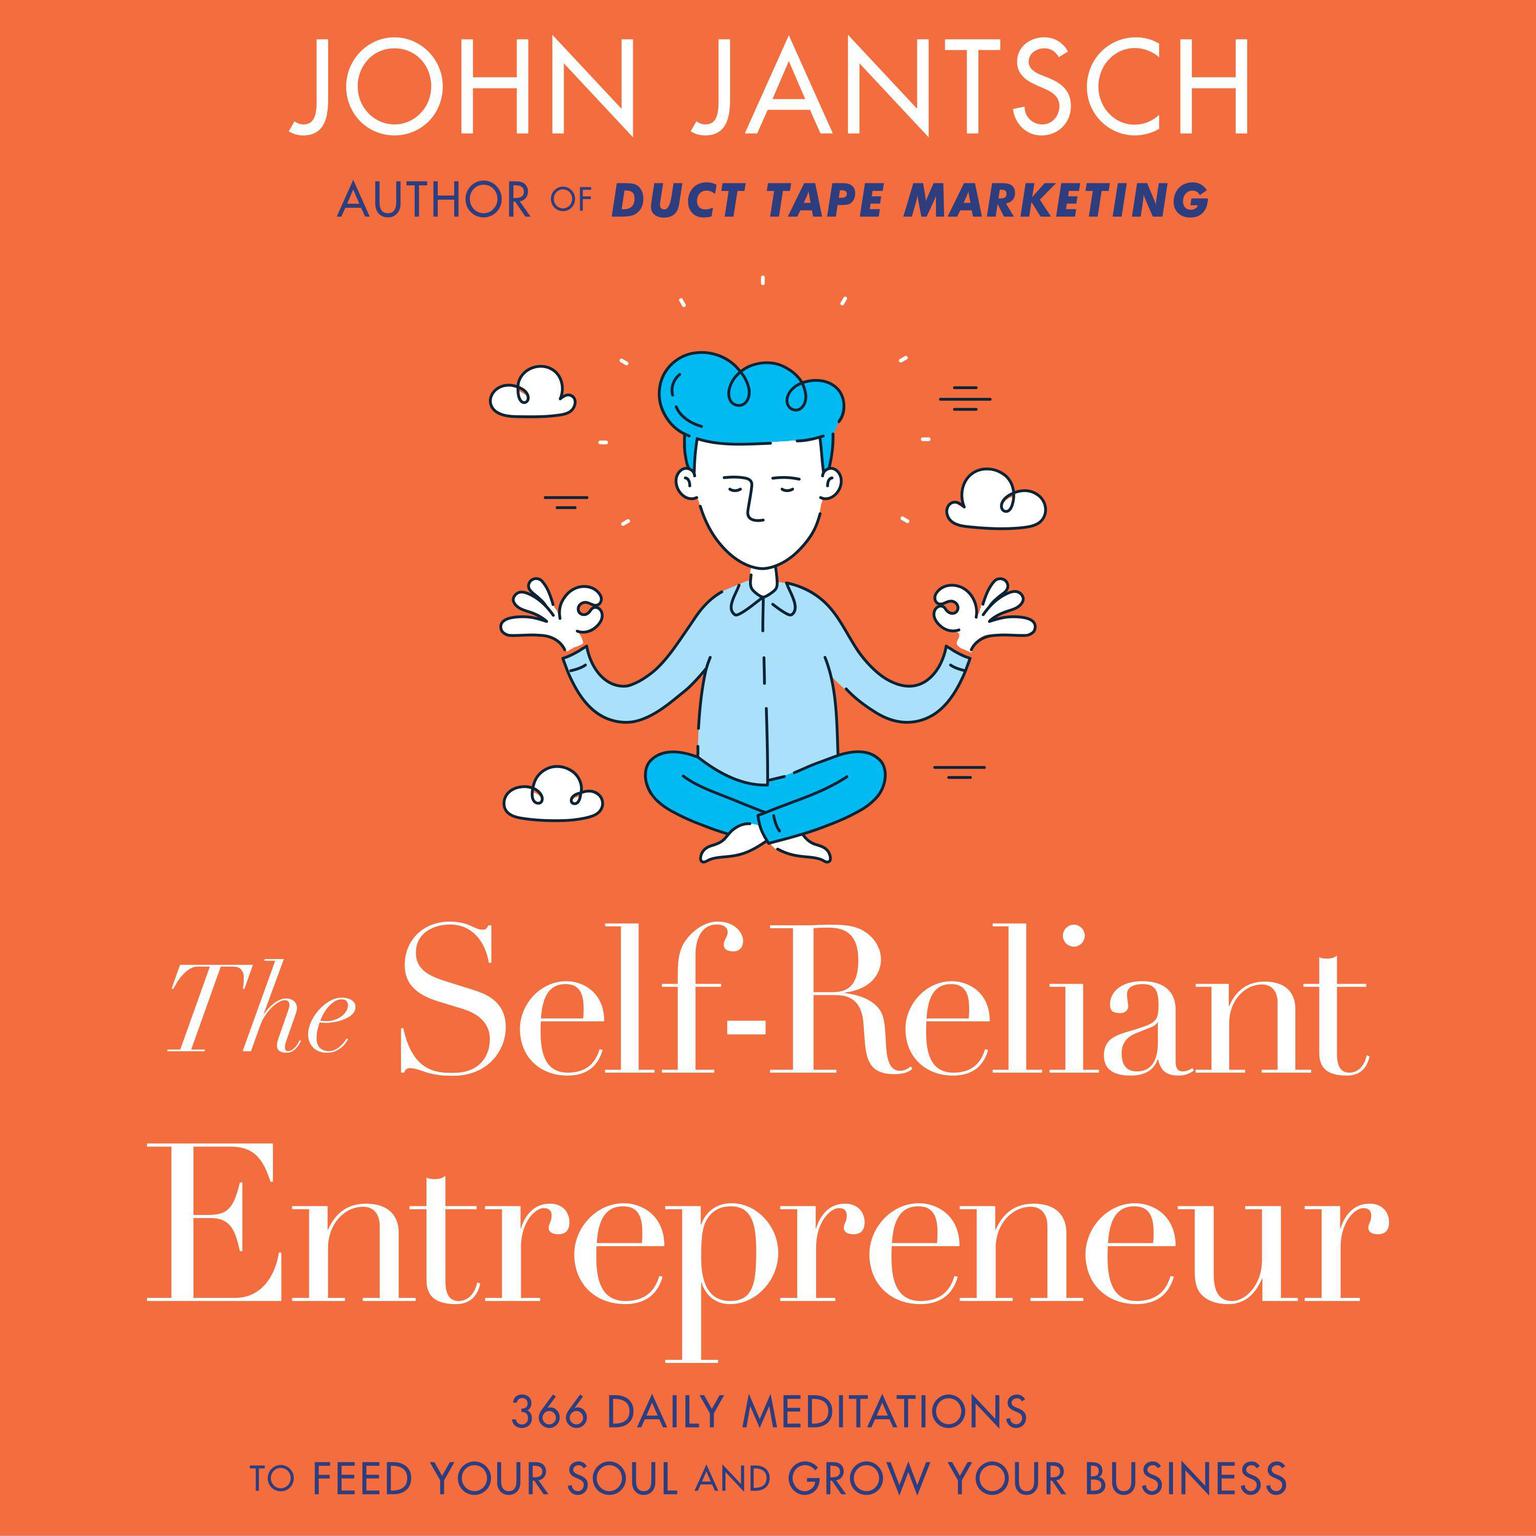 The Self-Reliant Entrepreneur: 366 Daily Meditations to Feed Your Soul and Grow Your Business Audiobook, by John Jantsch